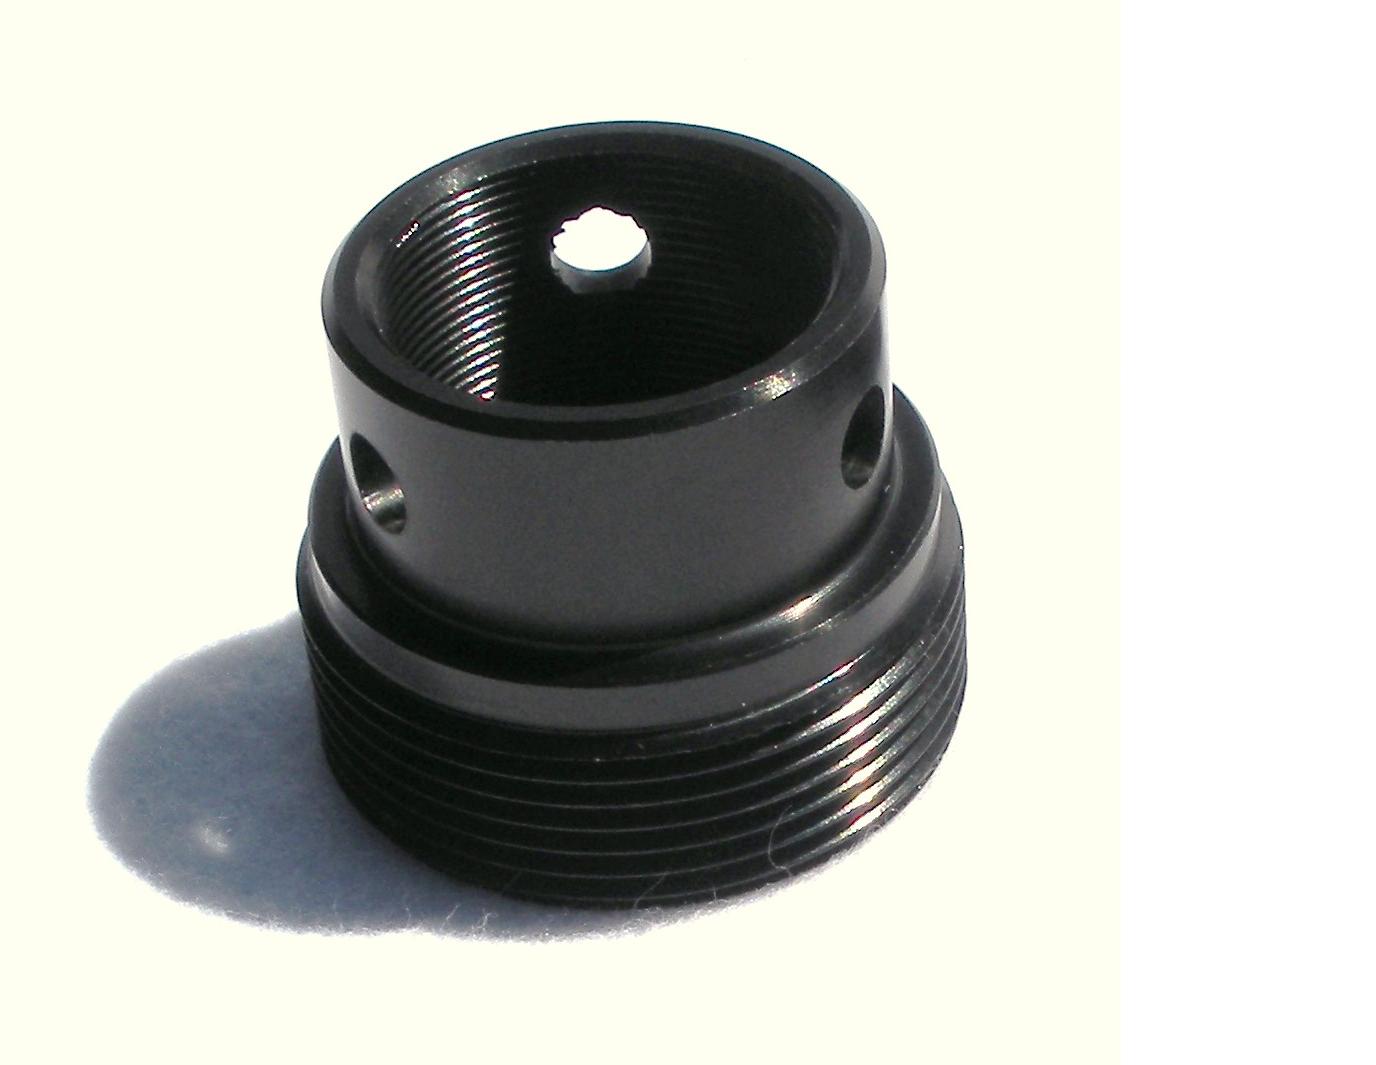 Use this threaded adapter to convert your Smith & Wesson M&...